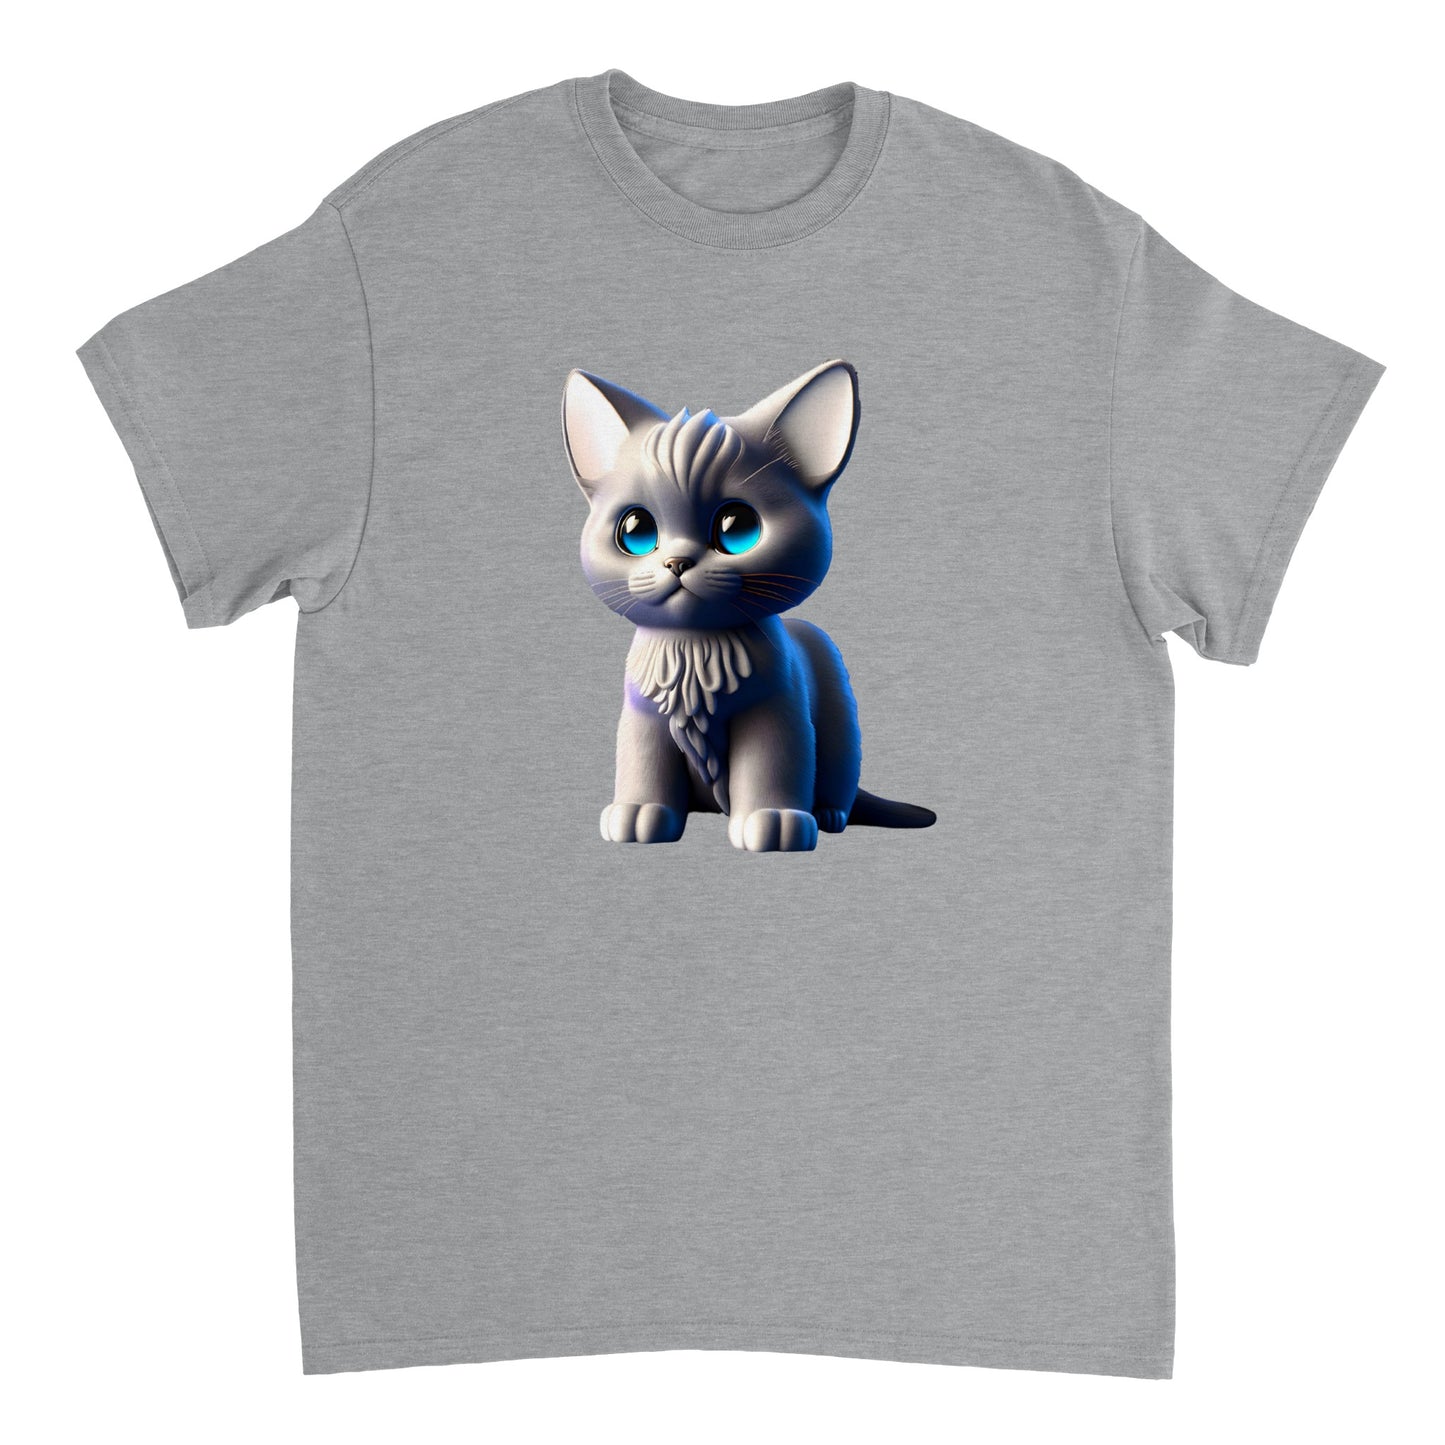 Adorable, Cool, Cute Cats and Kittens Toy - Heavyweight Unisex Crewneck T-shirt 38